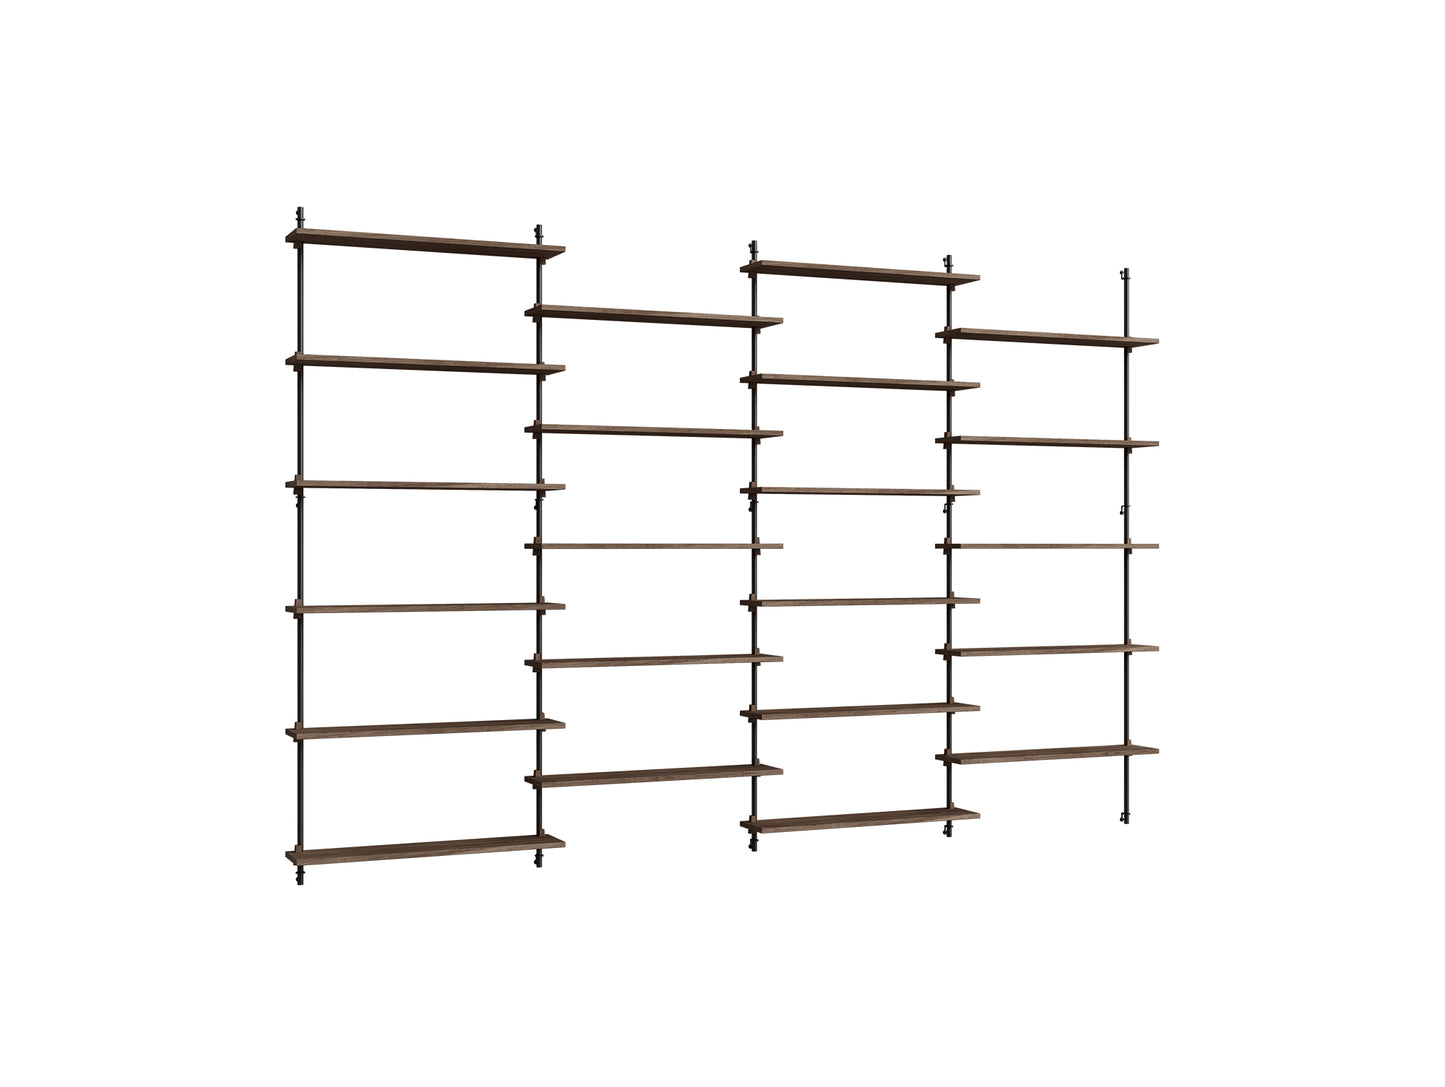 Wall Shelving System Sets (200 cm) by Moebe - WS.200.4 / Black Uprights / Smoked Oak